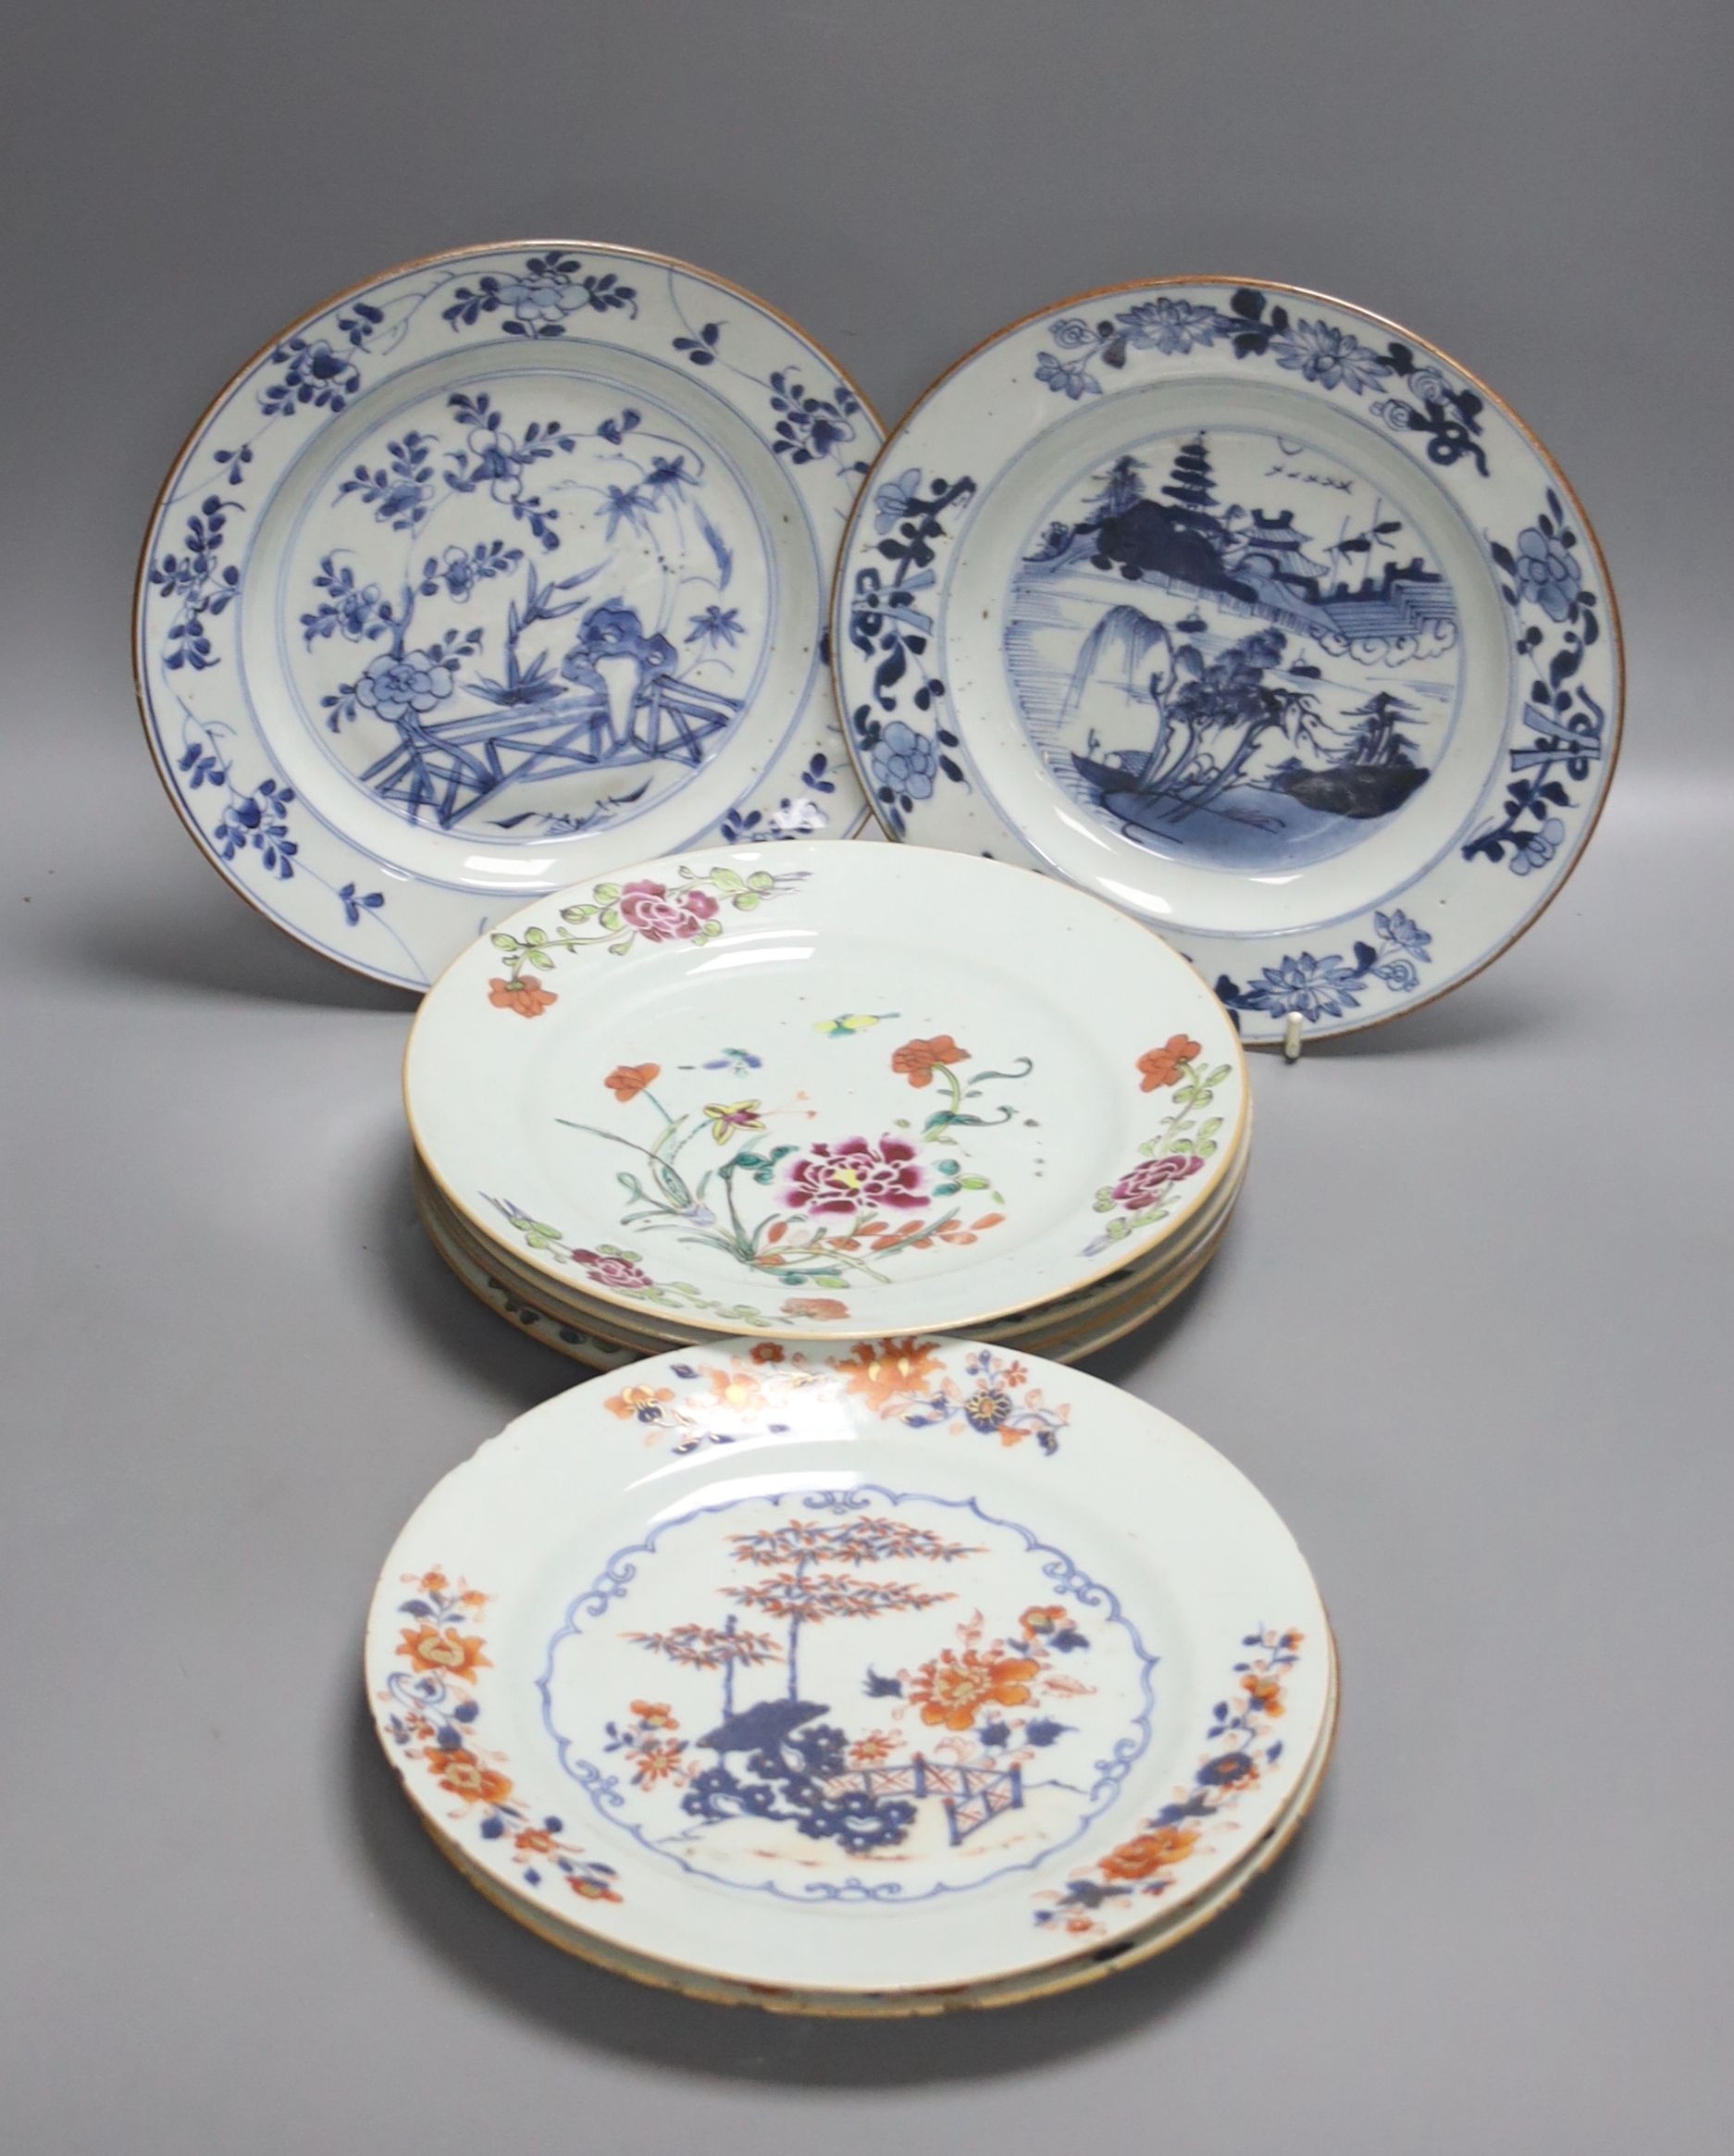 Two 18th century Chinese export blue and white plates, a pair of Chinese Imari patterned plates and four famille rose plates